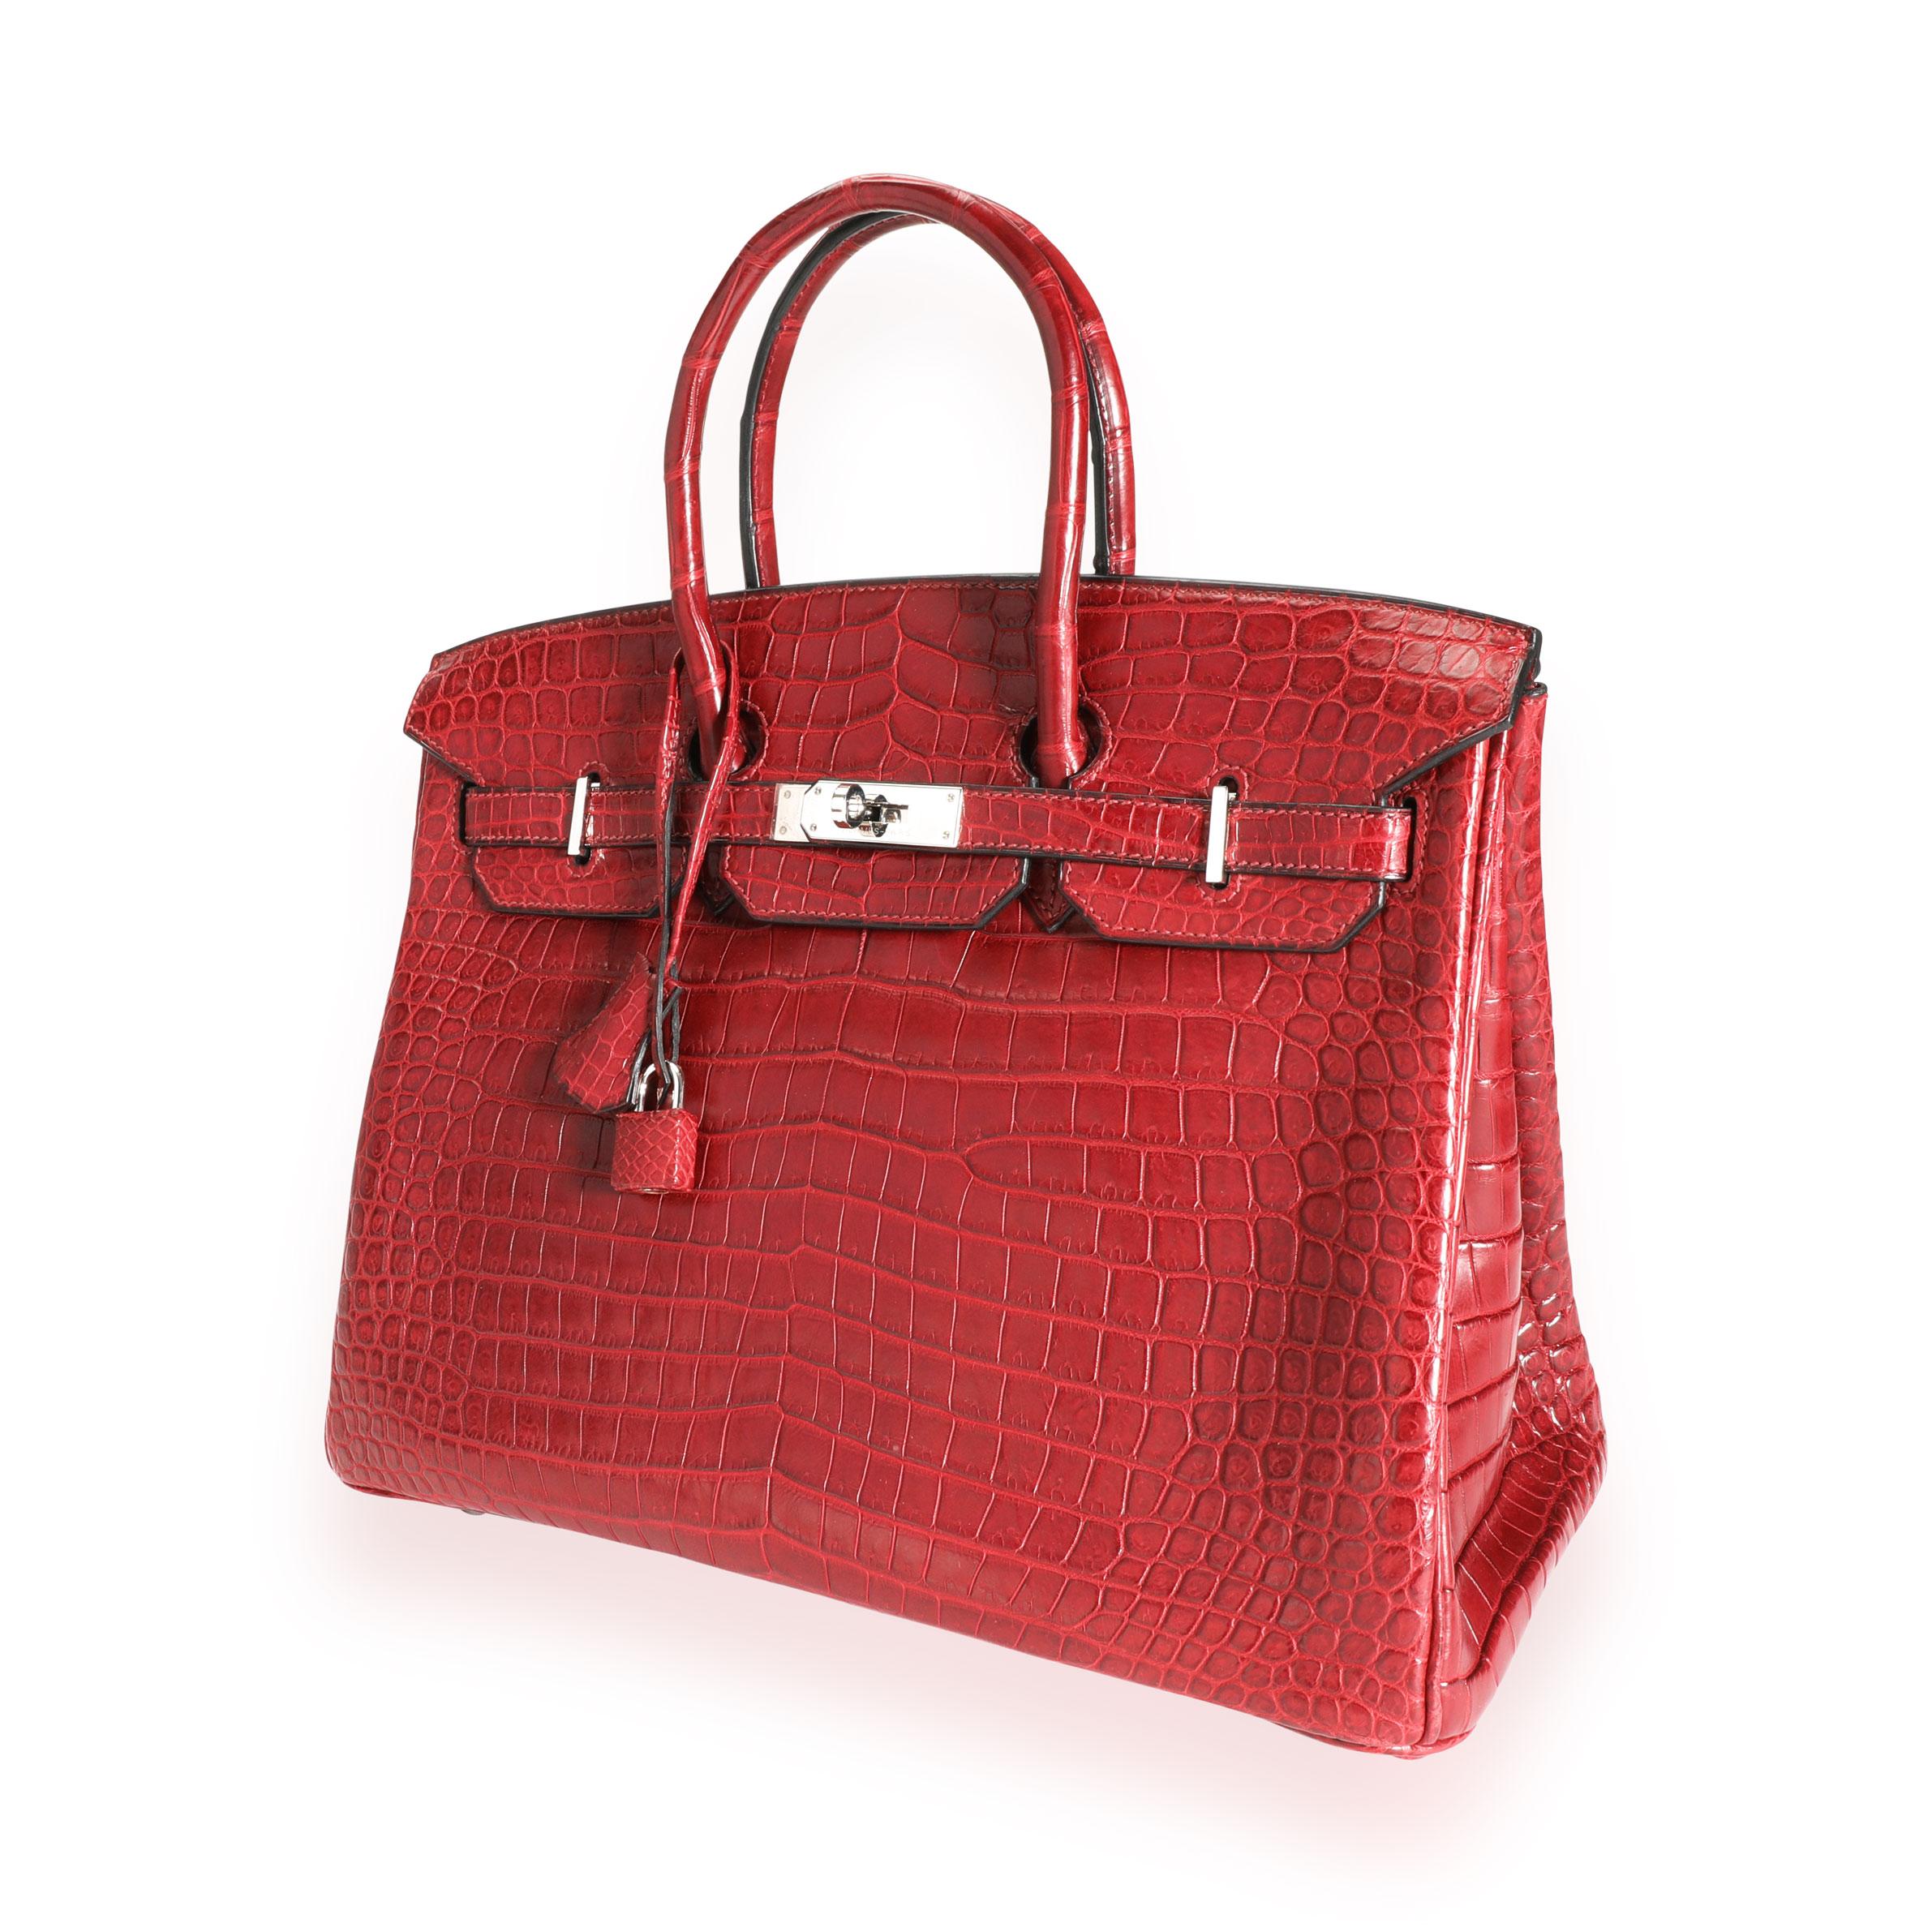 Hermès Rouge H Matte Porosus Crocodile Birkin 35 PHW
SKU: 111789
MSRP:  
Condition: Pre-owned (3000)
Condition Description: 
Handbag Condition: Very Good
Condition Comments: Very Good Condition. Plastic on some hardware. Light scratching to